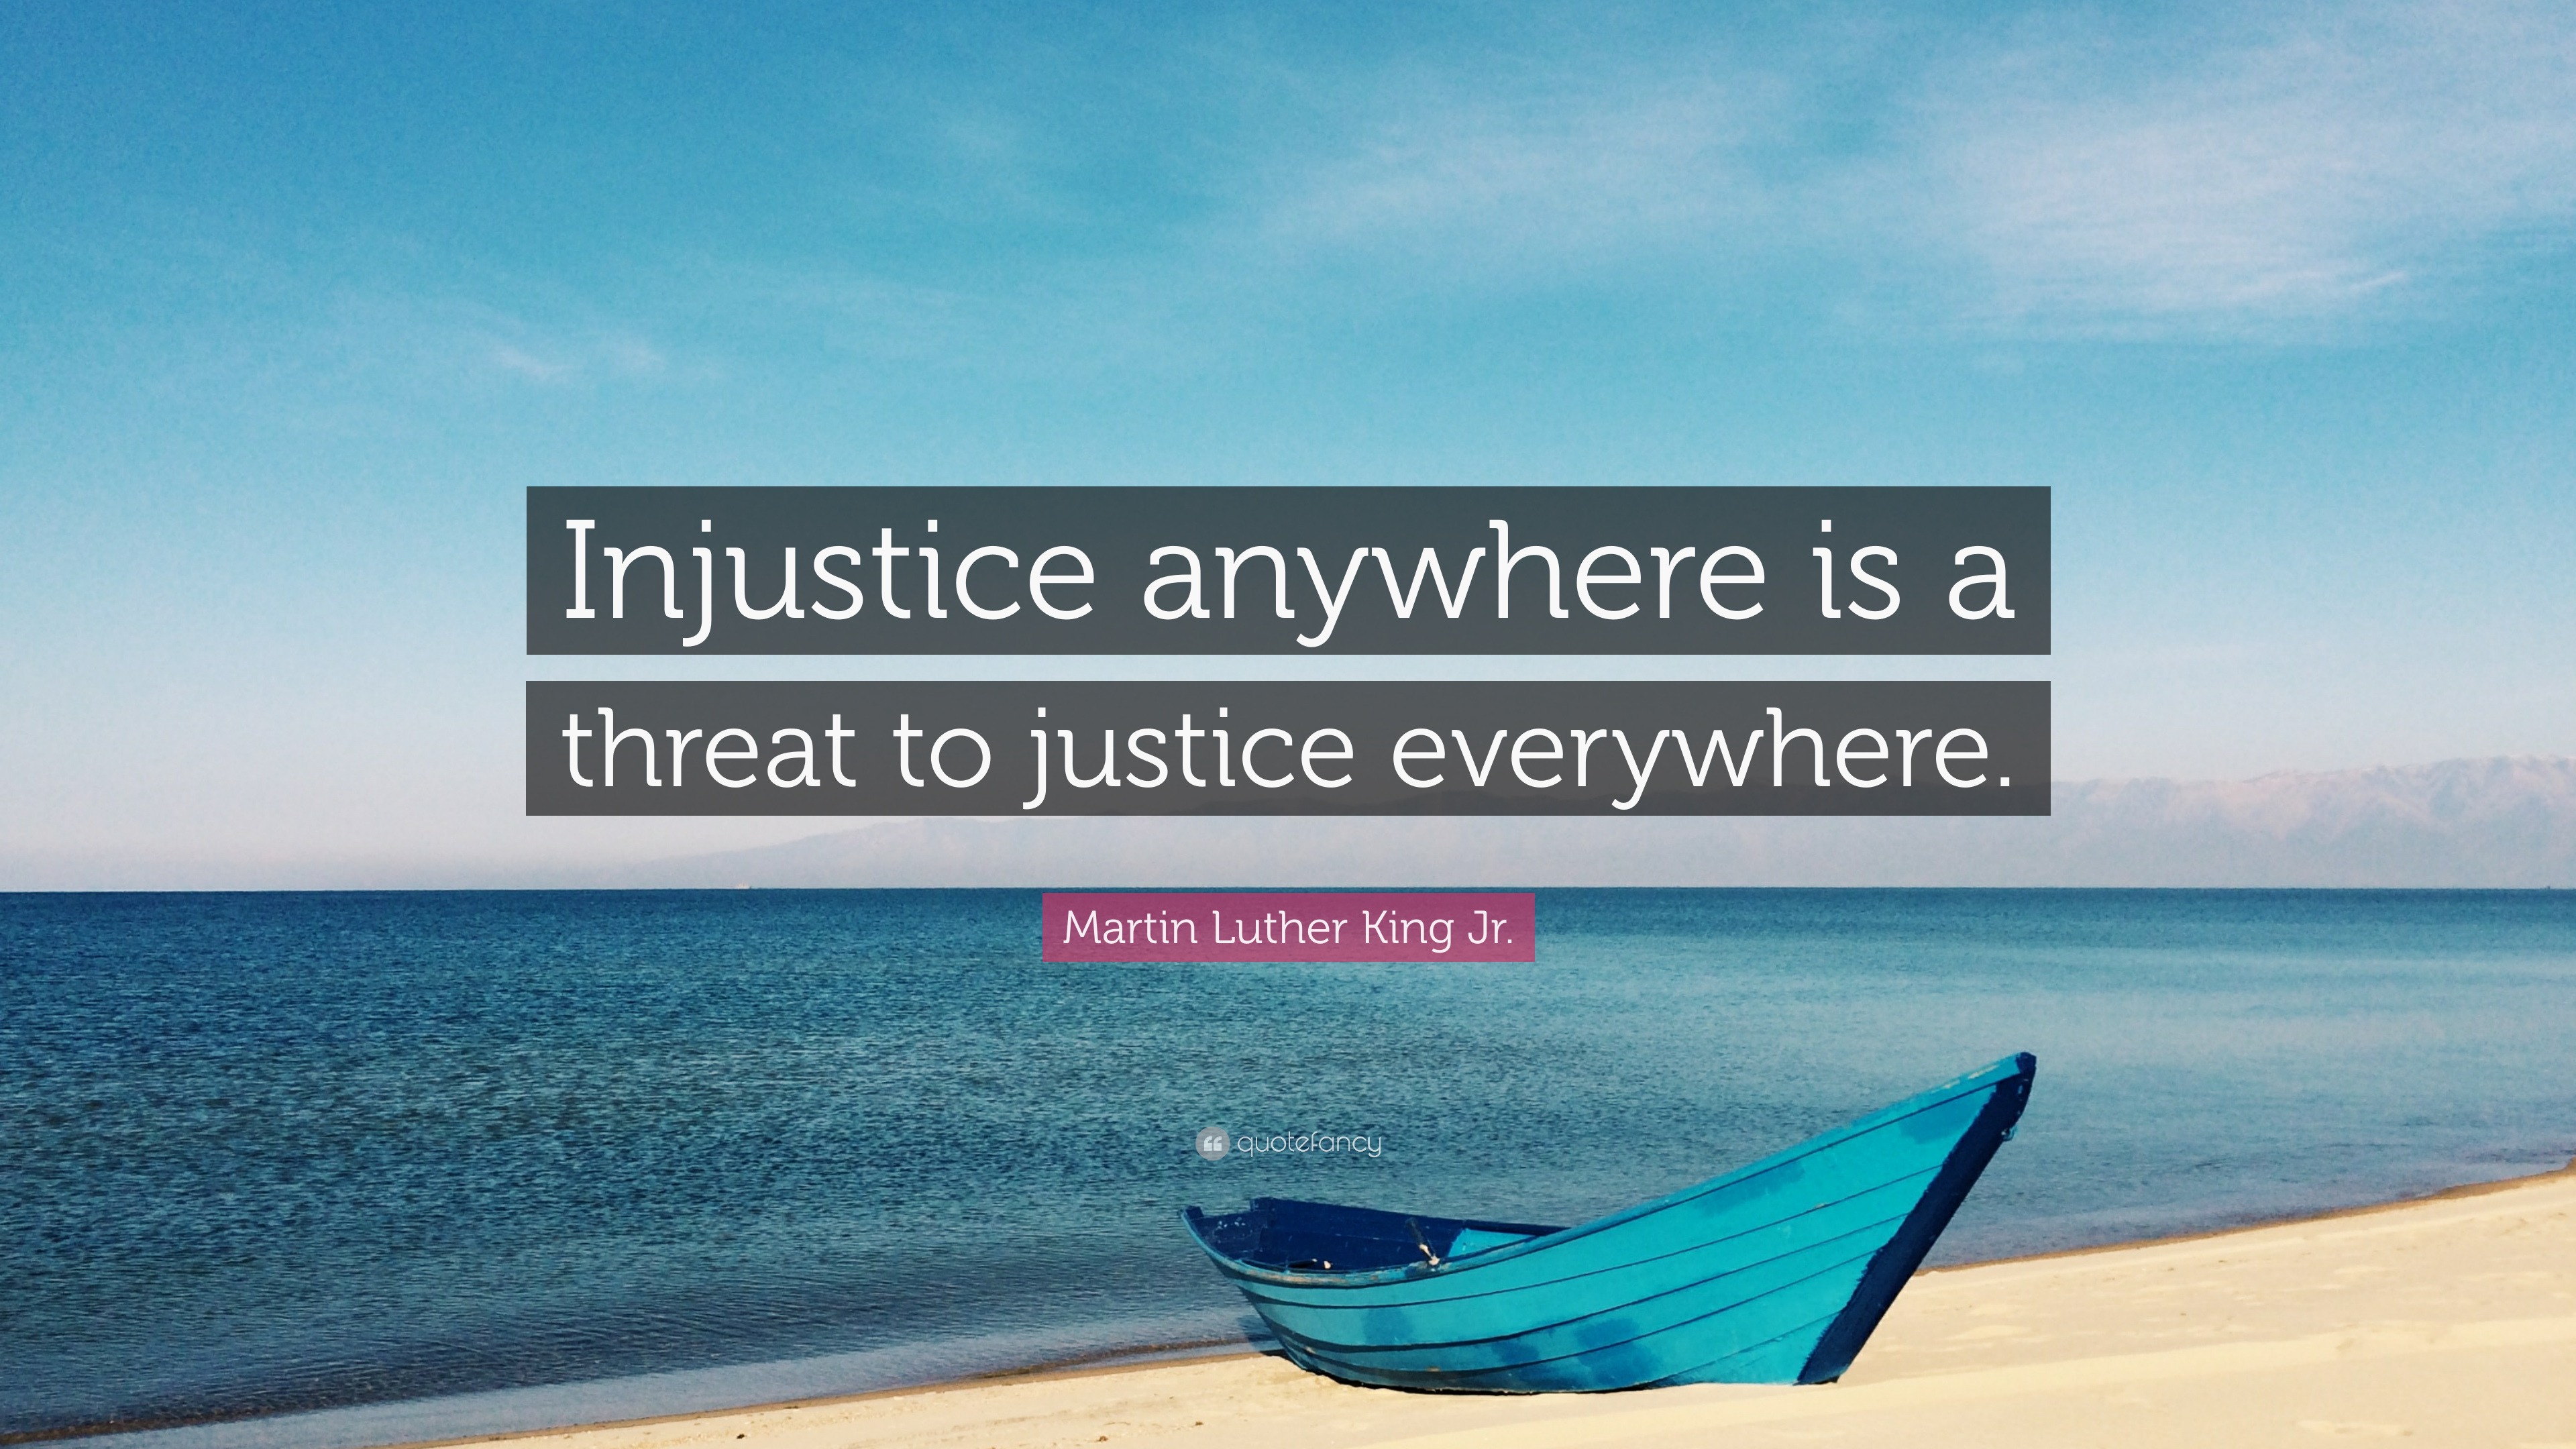 essay on injustice anywhere is a threat to justice